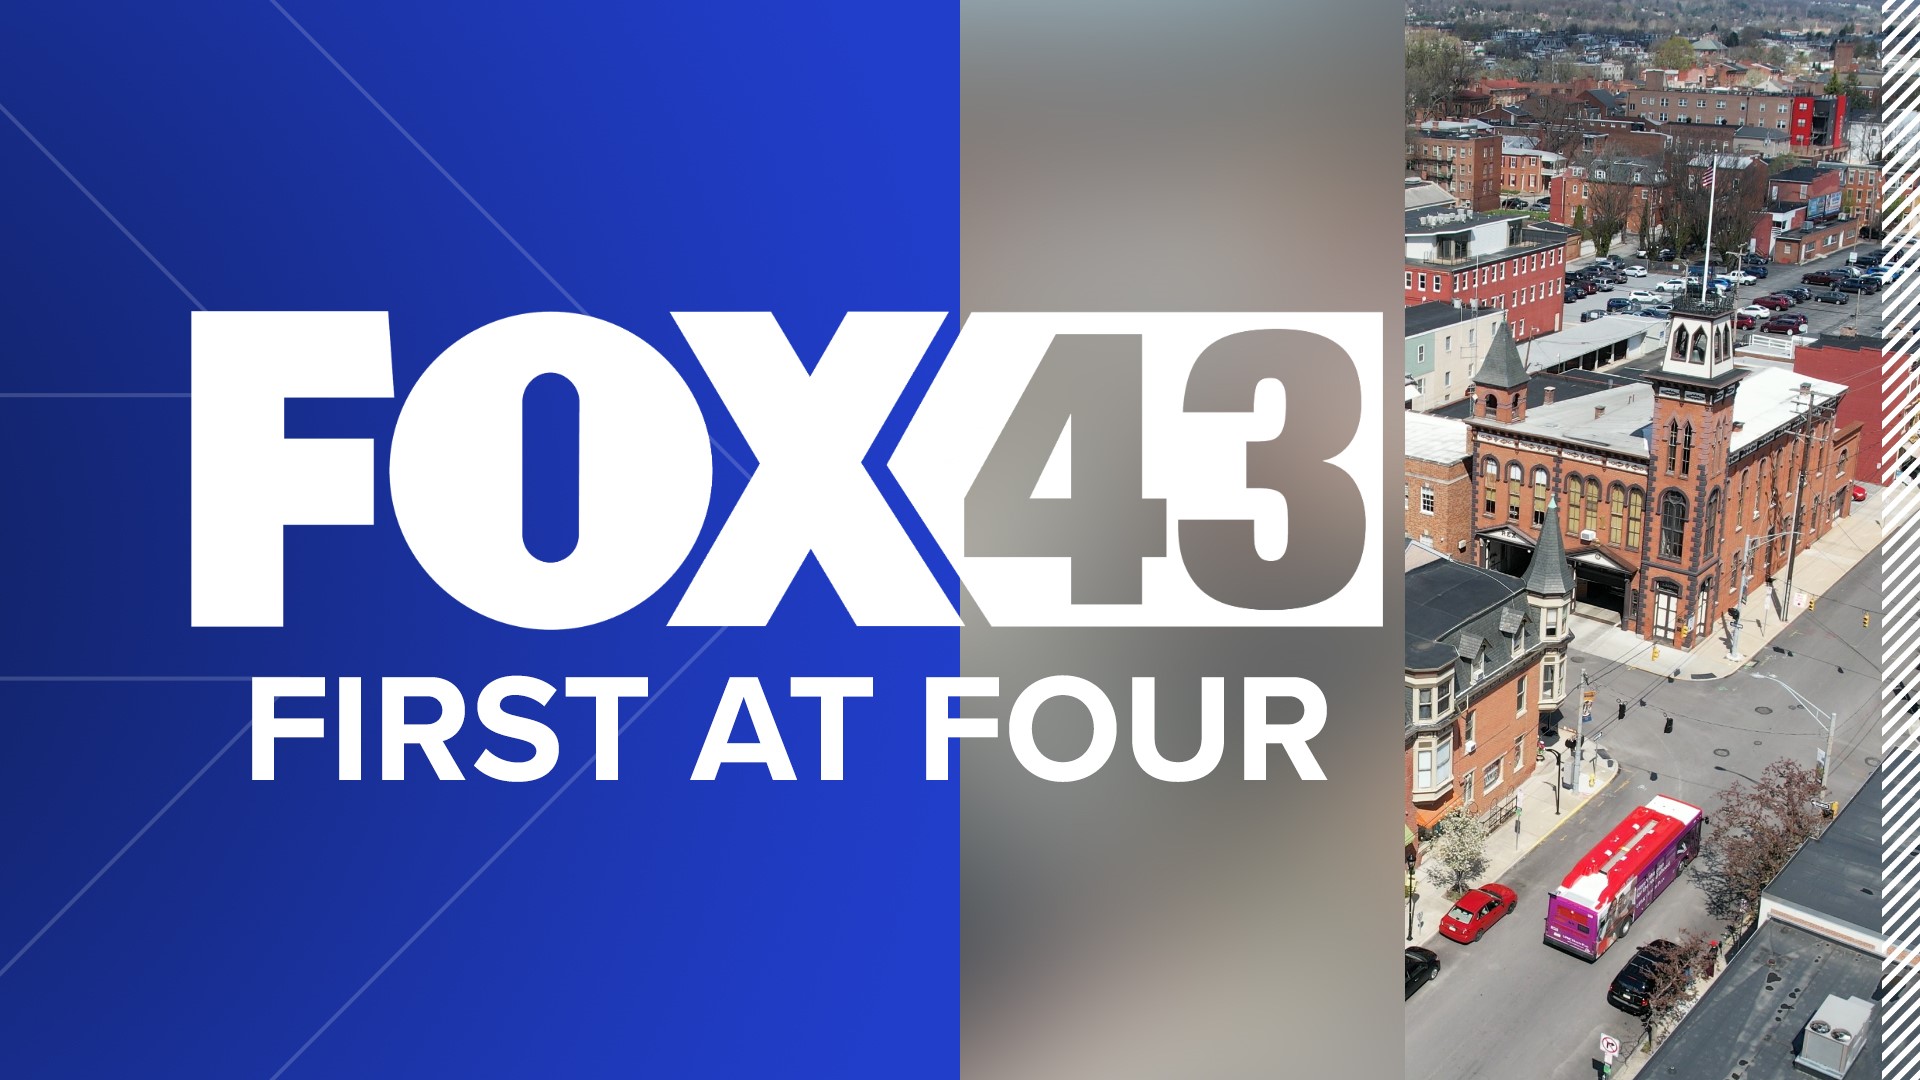 Your first chance to get caught up with the day's news. Expect more from the team at four.